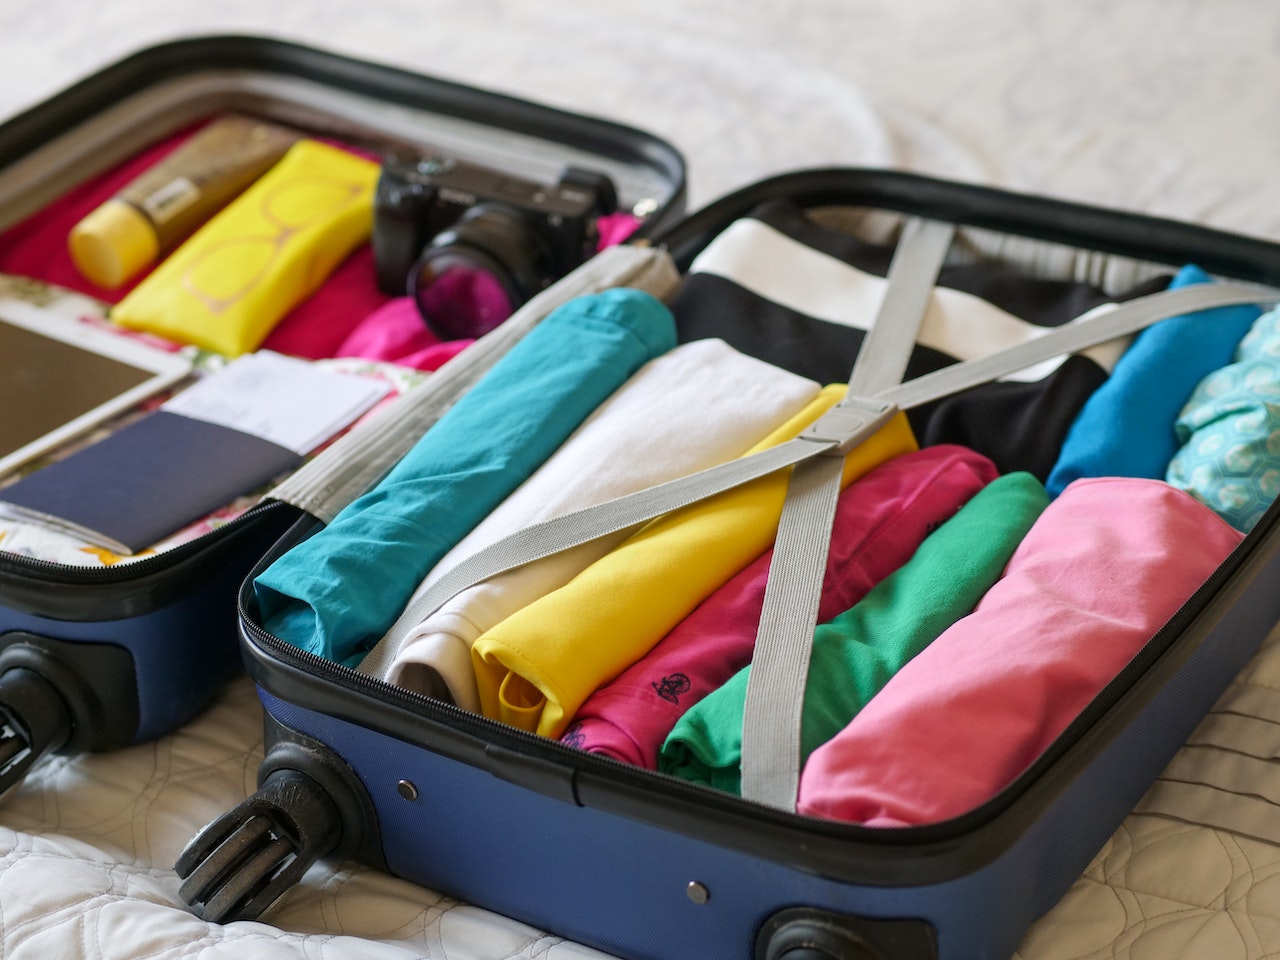 How to Maximize Space in Your Suitcase with Wheels